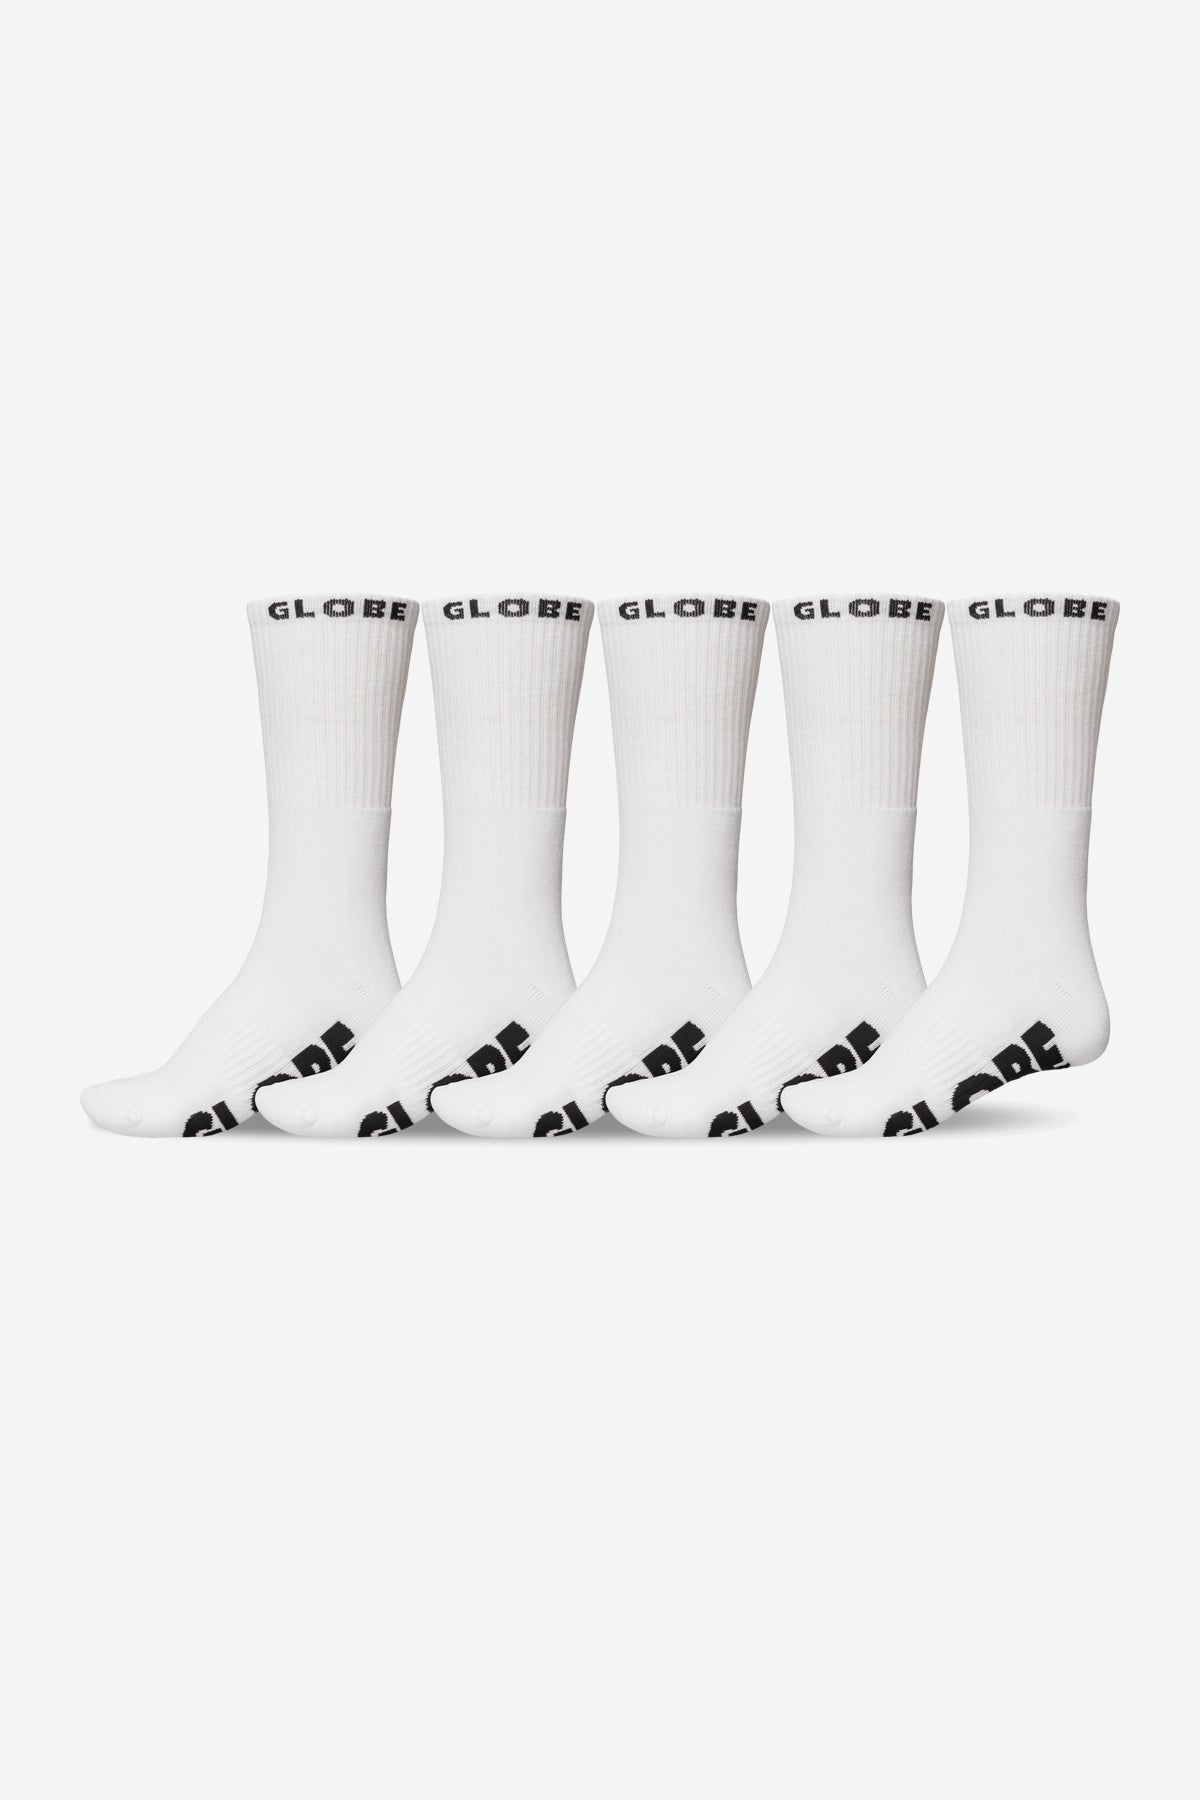 Pack de 5 calcetines Whiteout